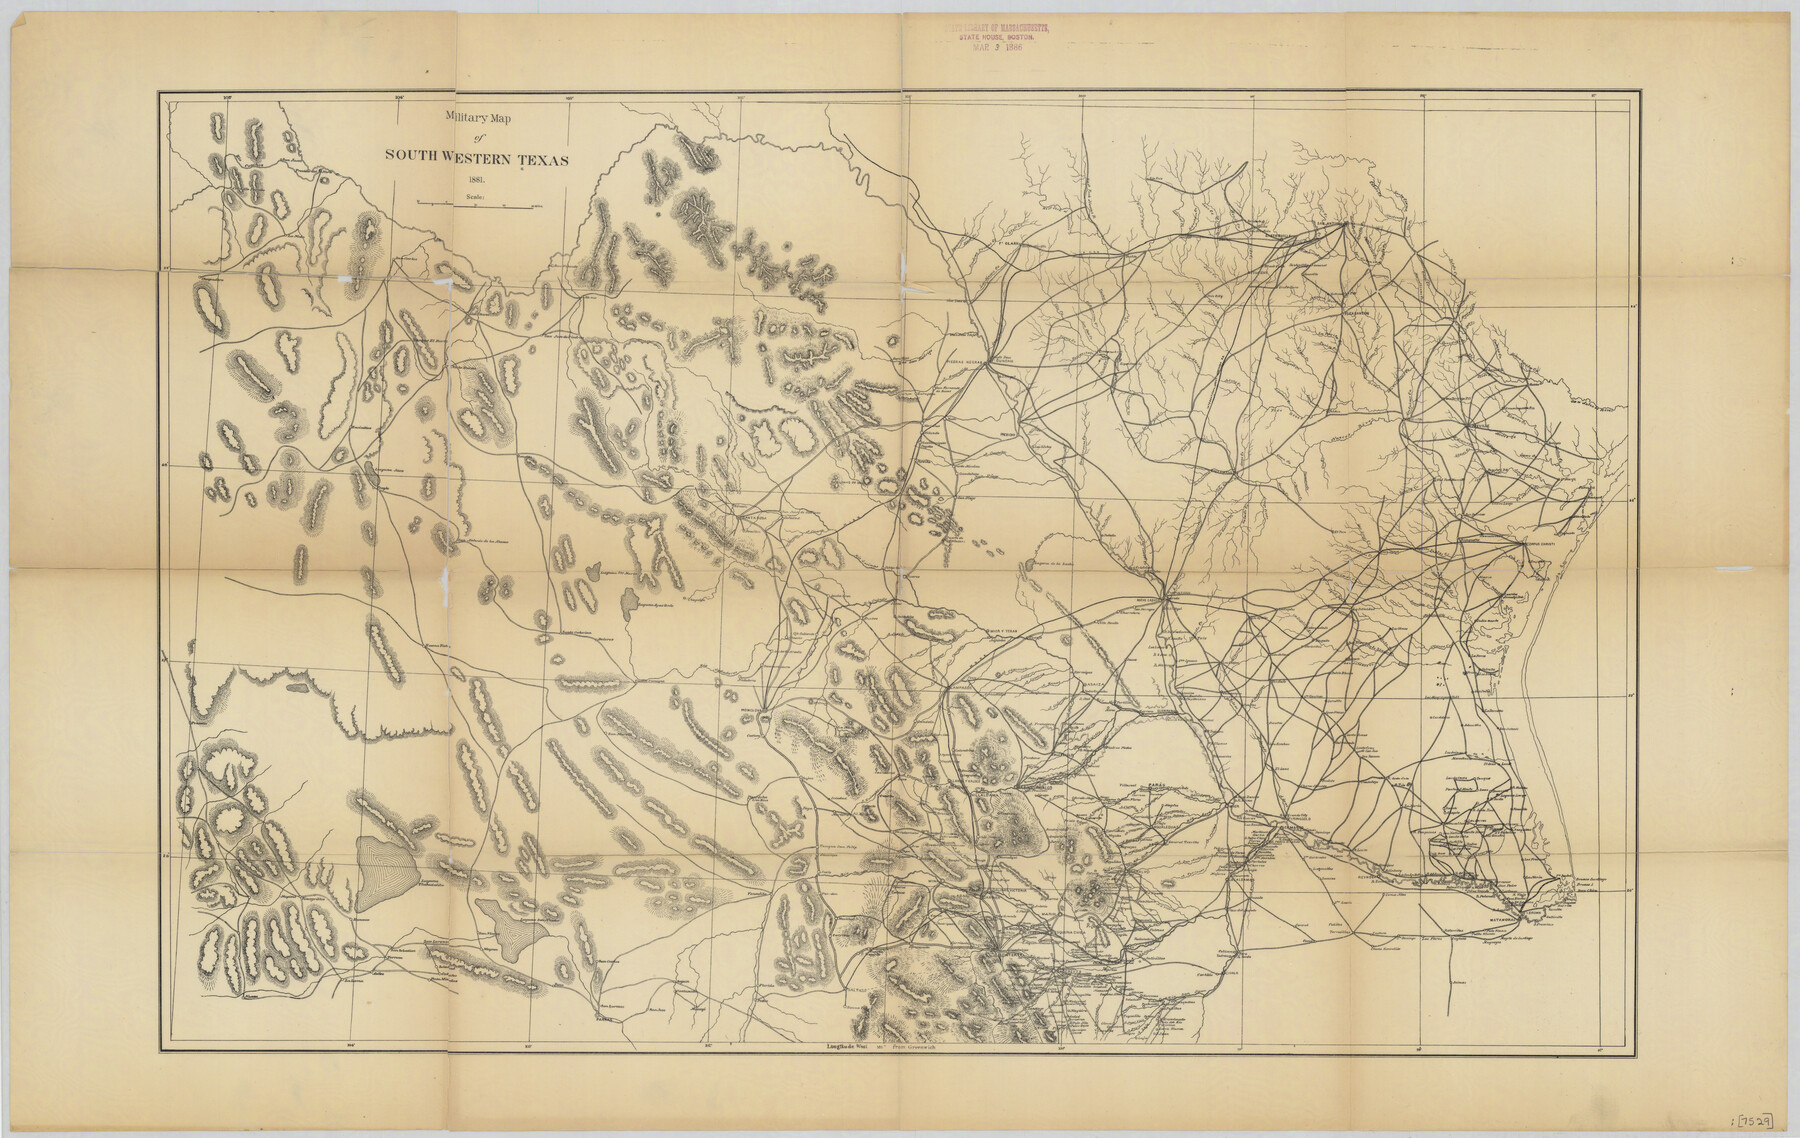 76316, Military Map of Southwestern Texas, Texas State Library and Archives